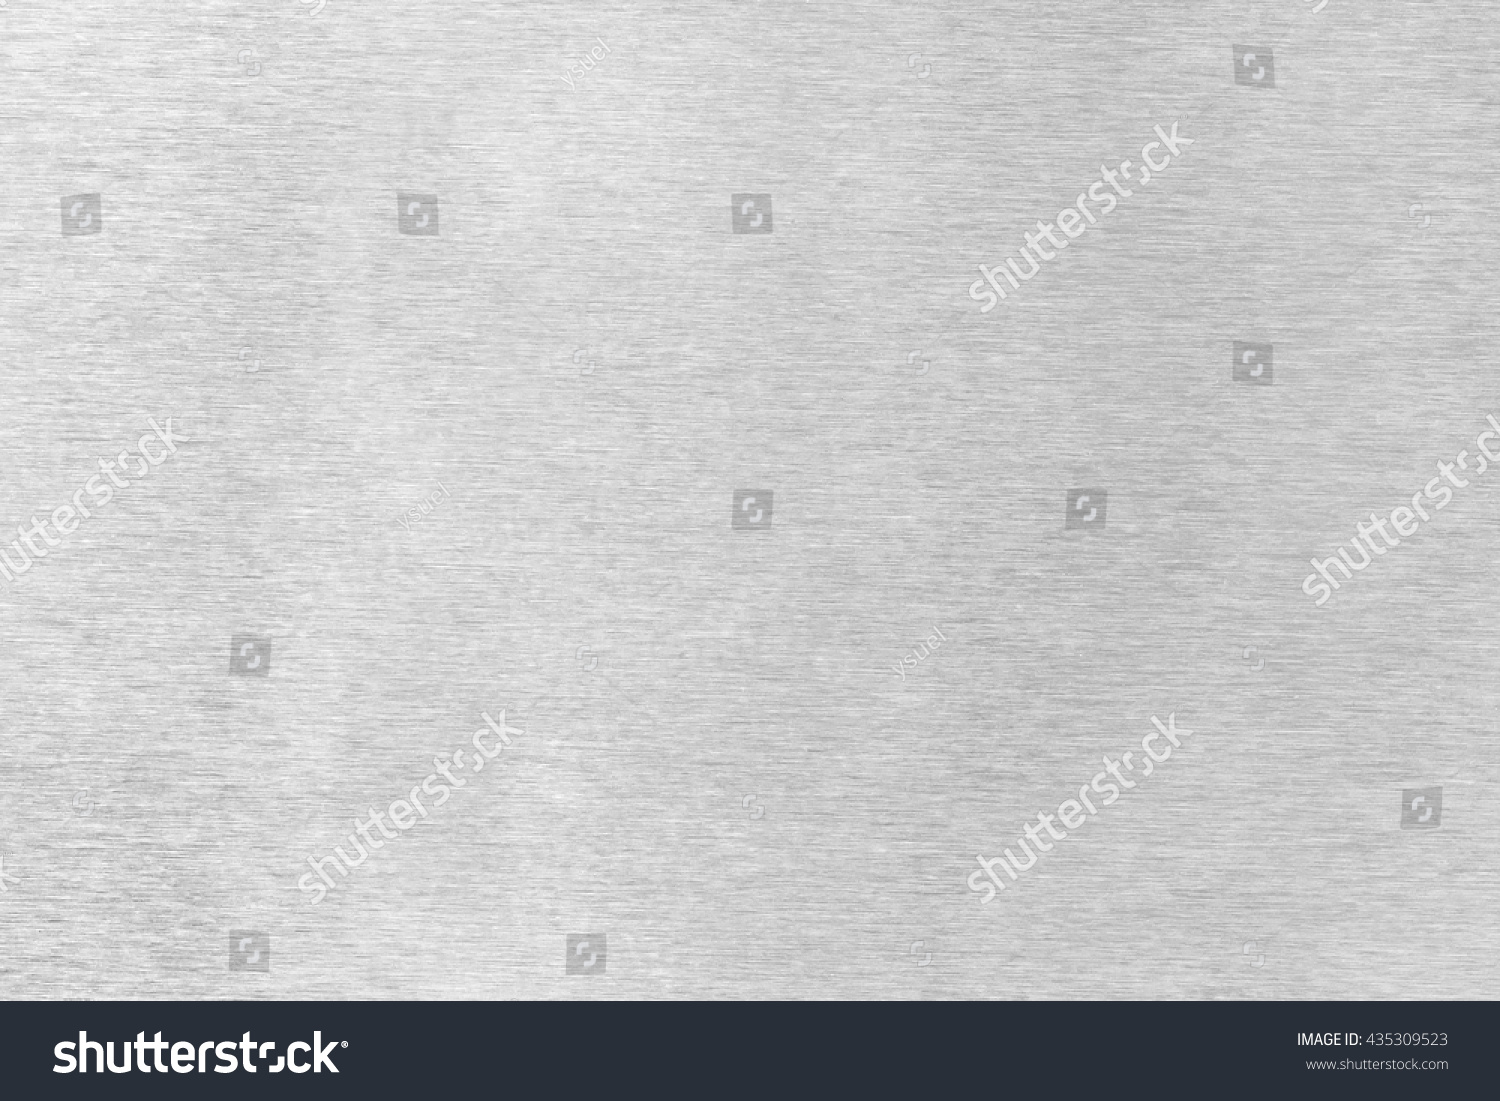 Light Gray Background Based On Steel Stock Photo (Edit Now) 435309523